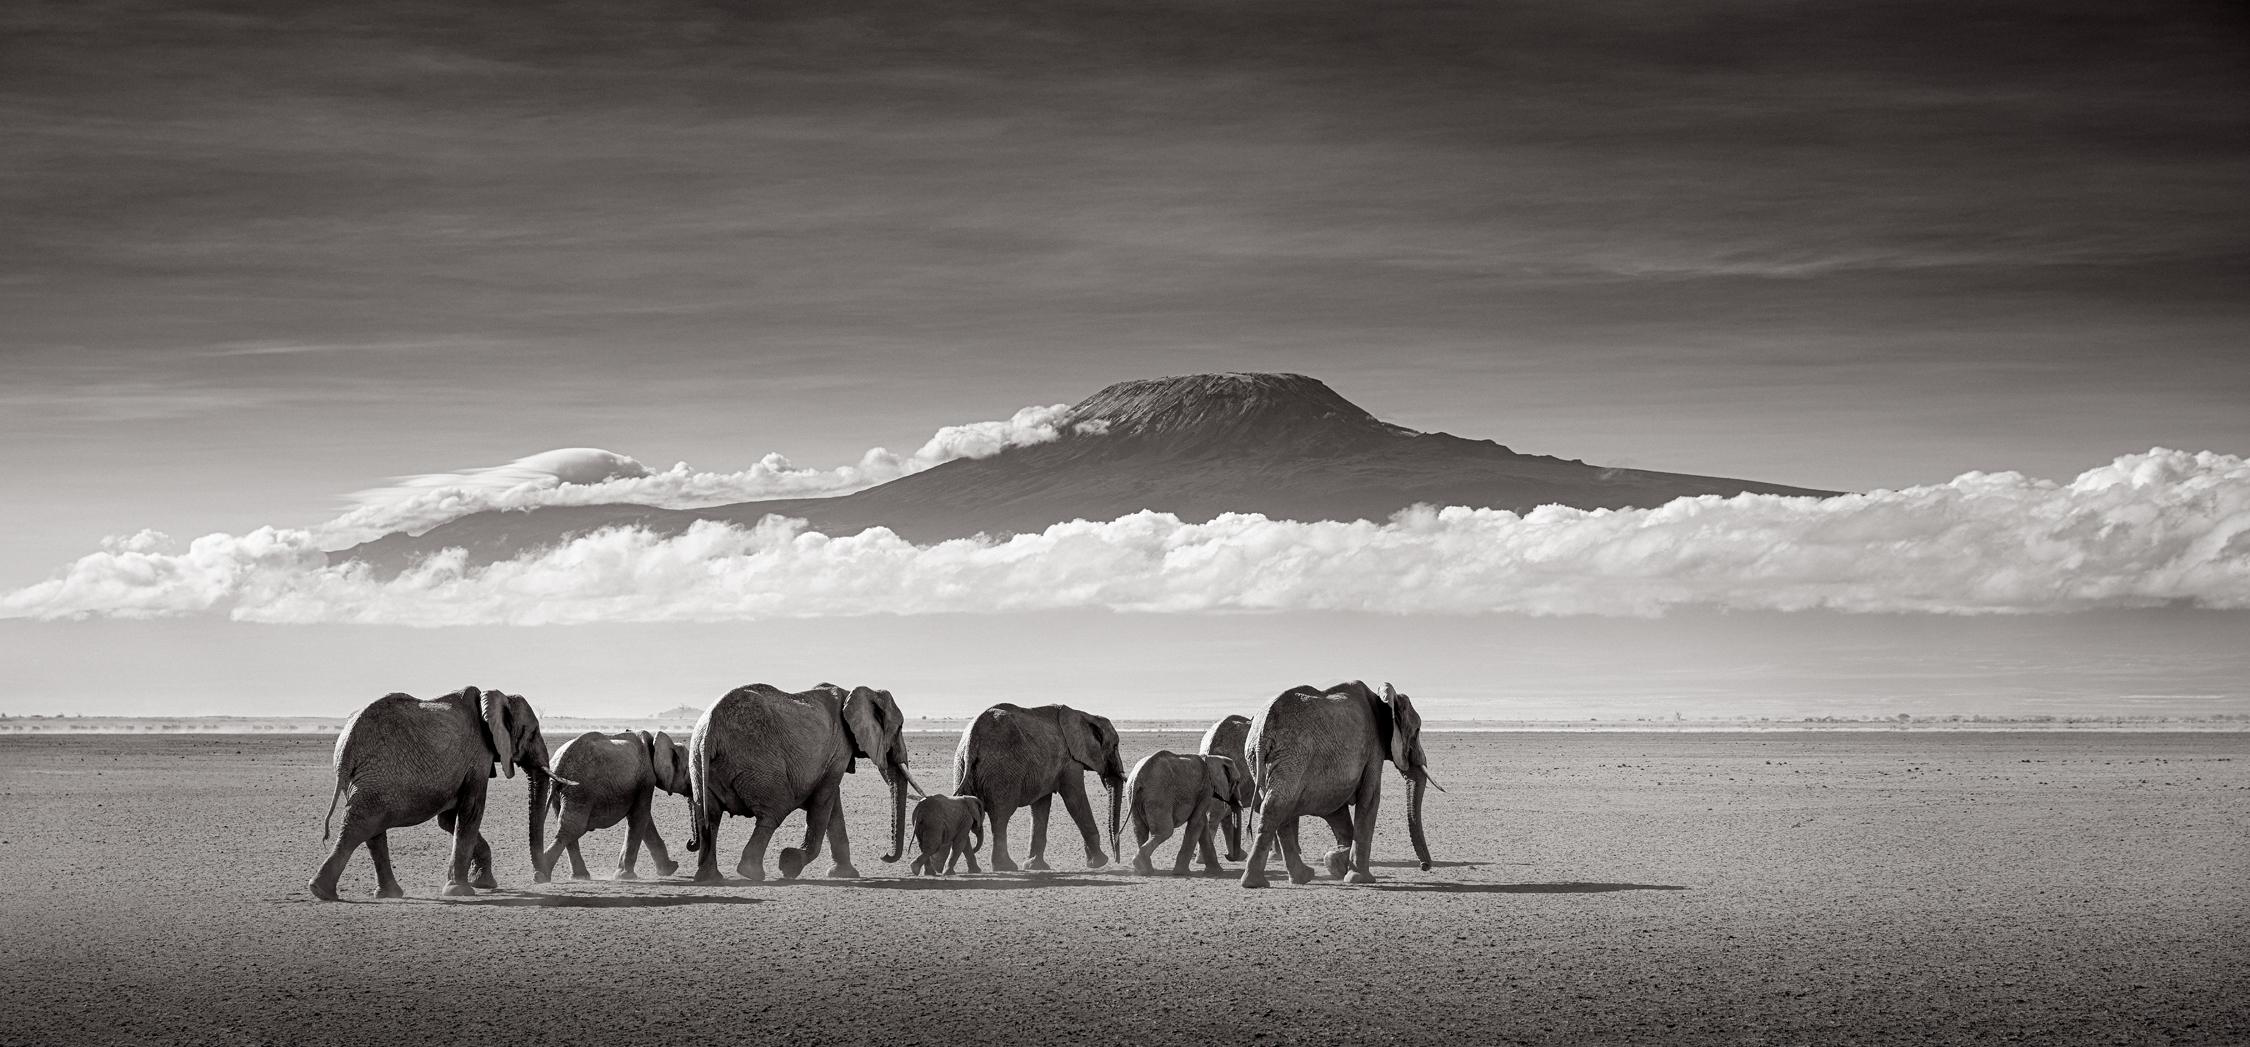 Drew Doggett Black and White Photograph - Elephants Walking Across Dry Lakebed with Mount Kilimanjaro as the Backdrop